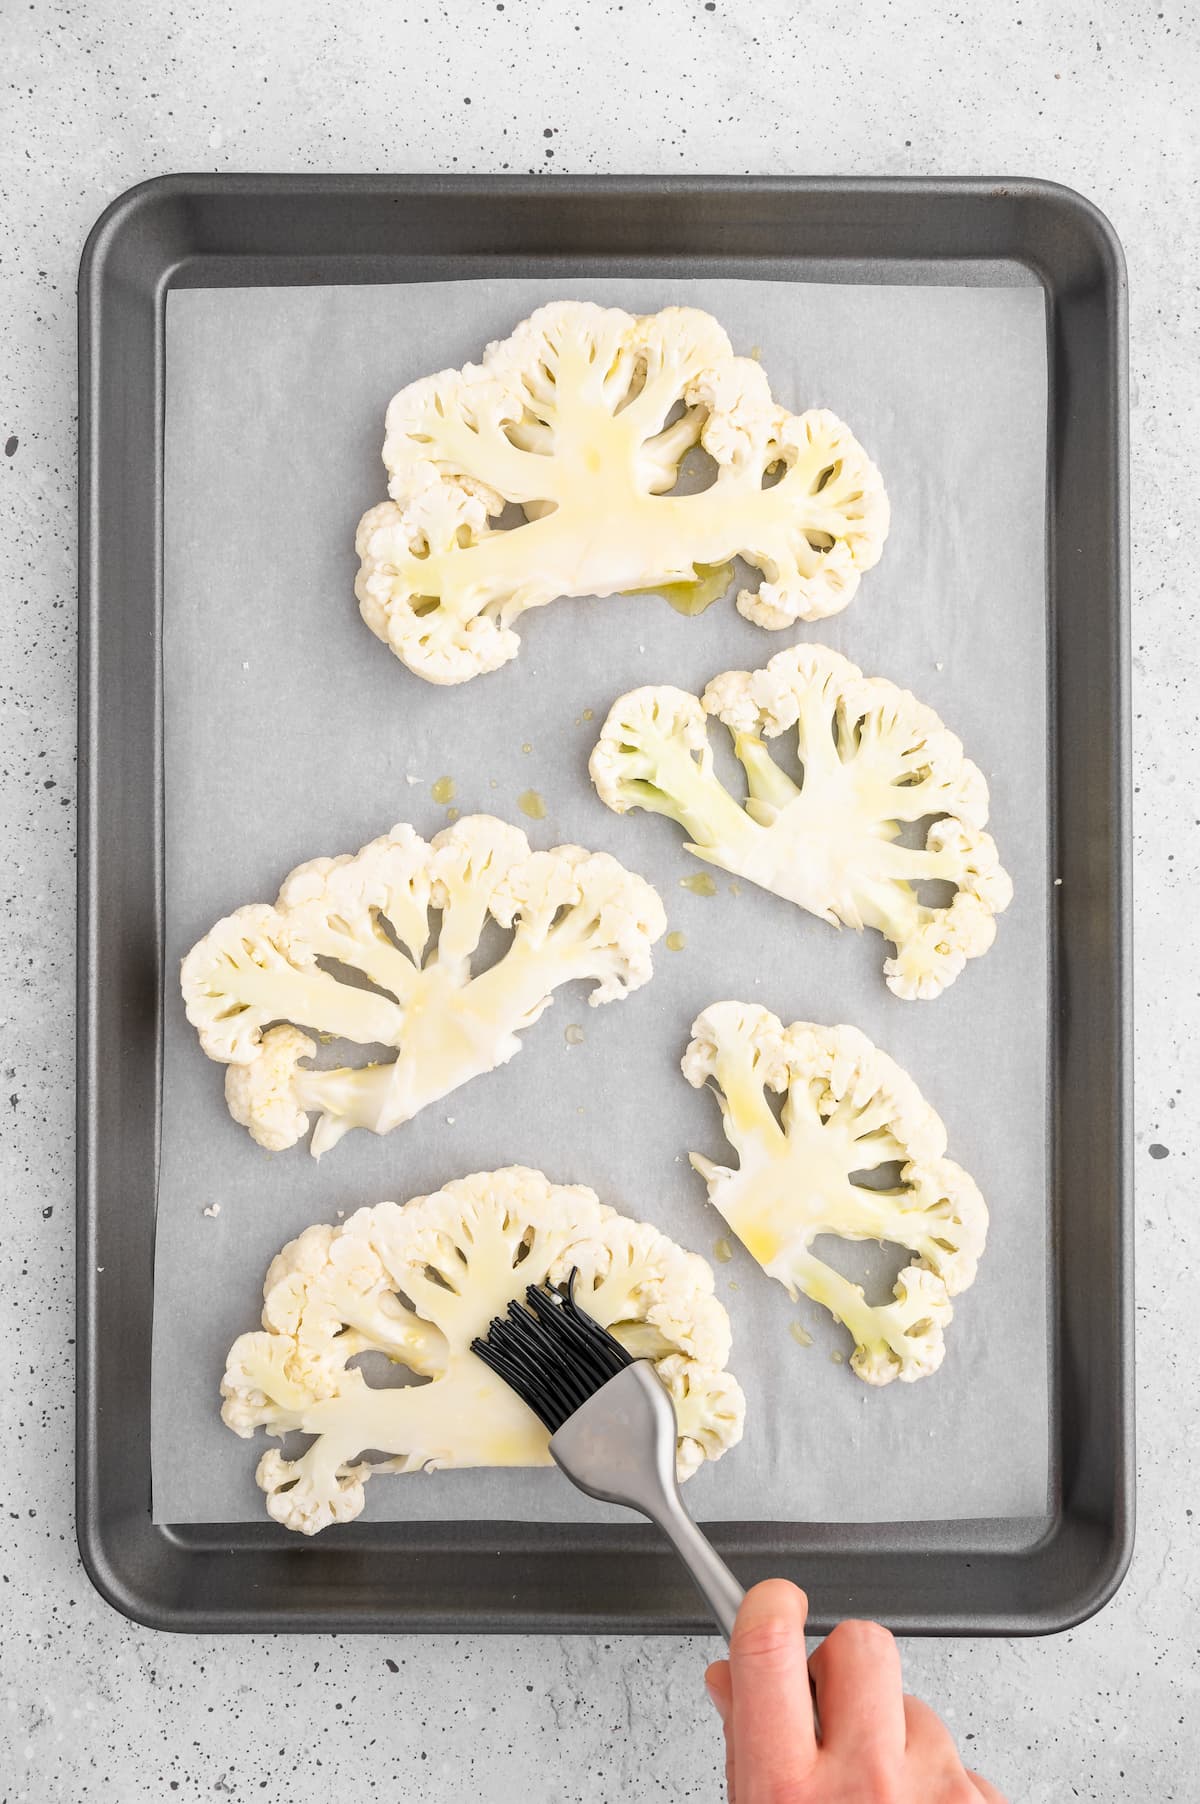 A basting brush applying oil to the cauliflower steaks on a baking tray.